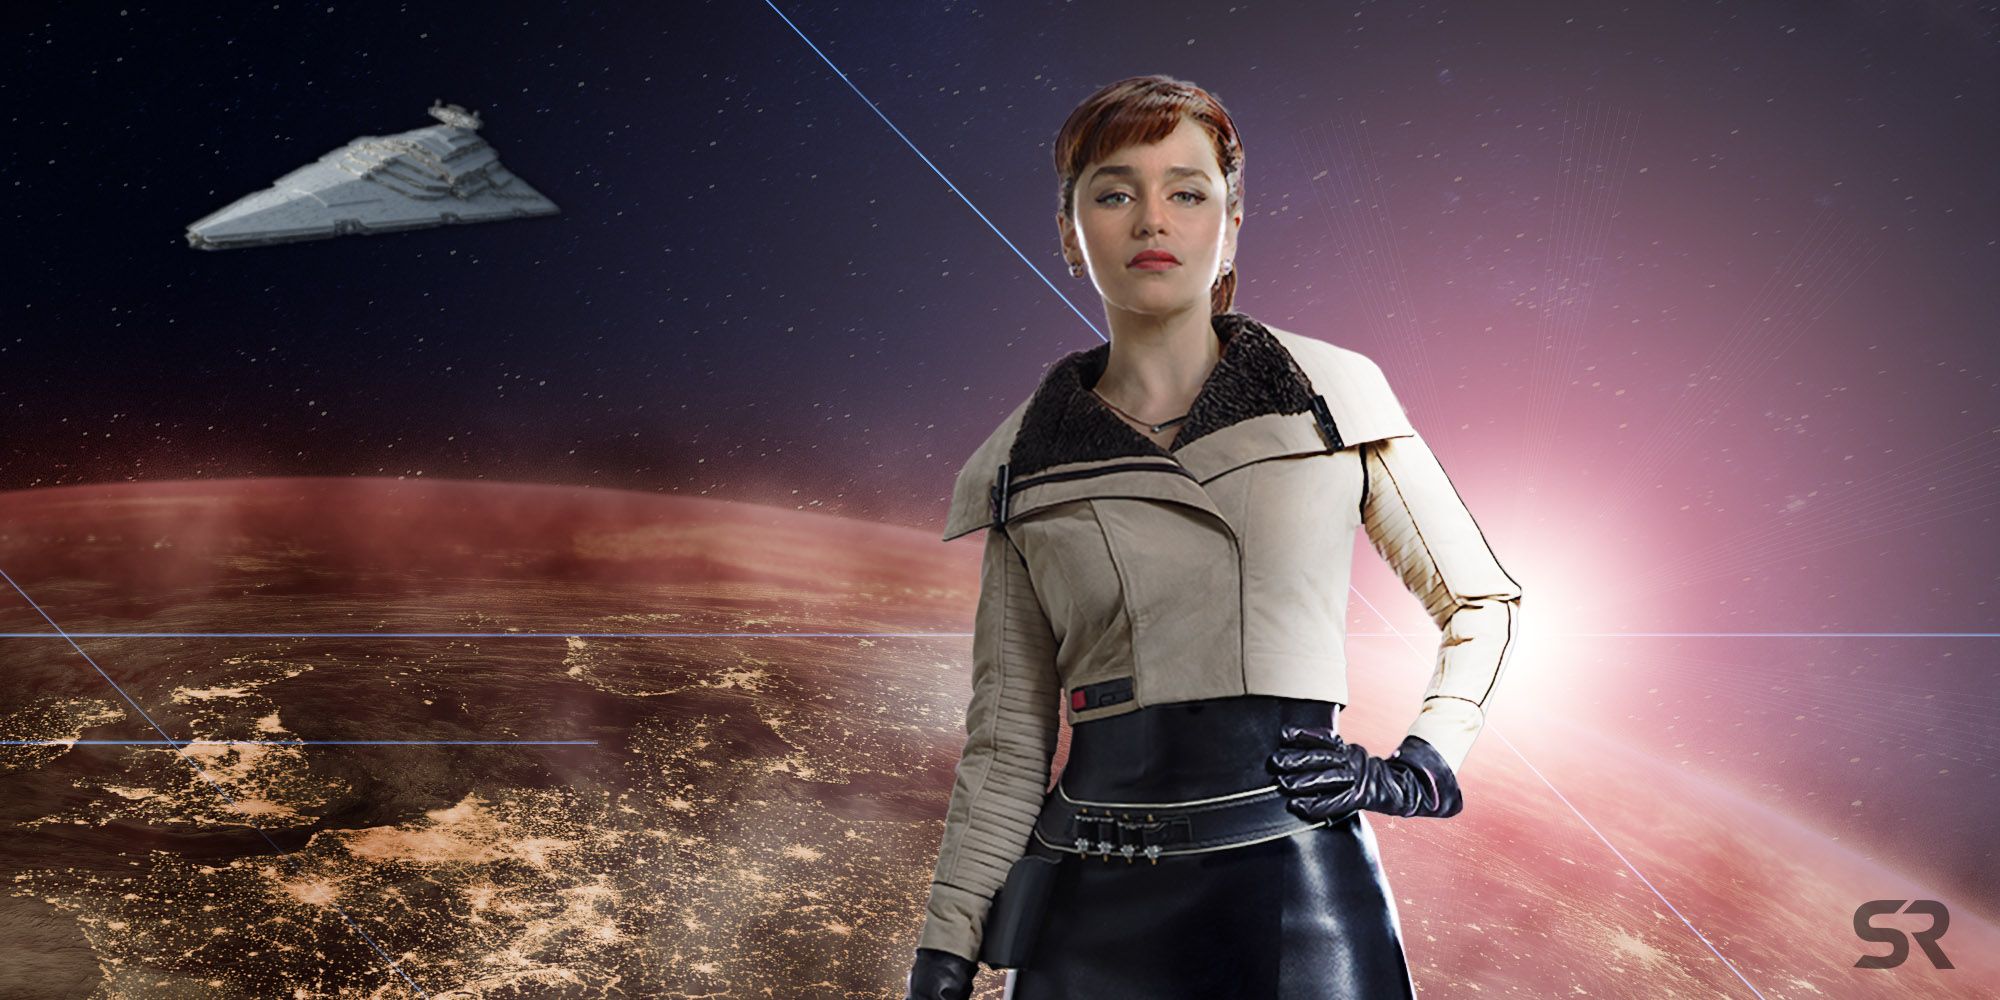 Qi'ra's return to Star Wars in Original Trilogy era is exciting for Emilia Clarke